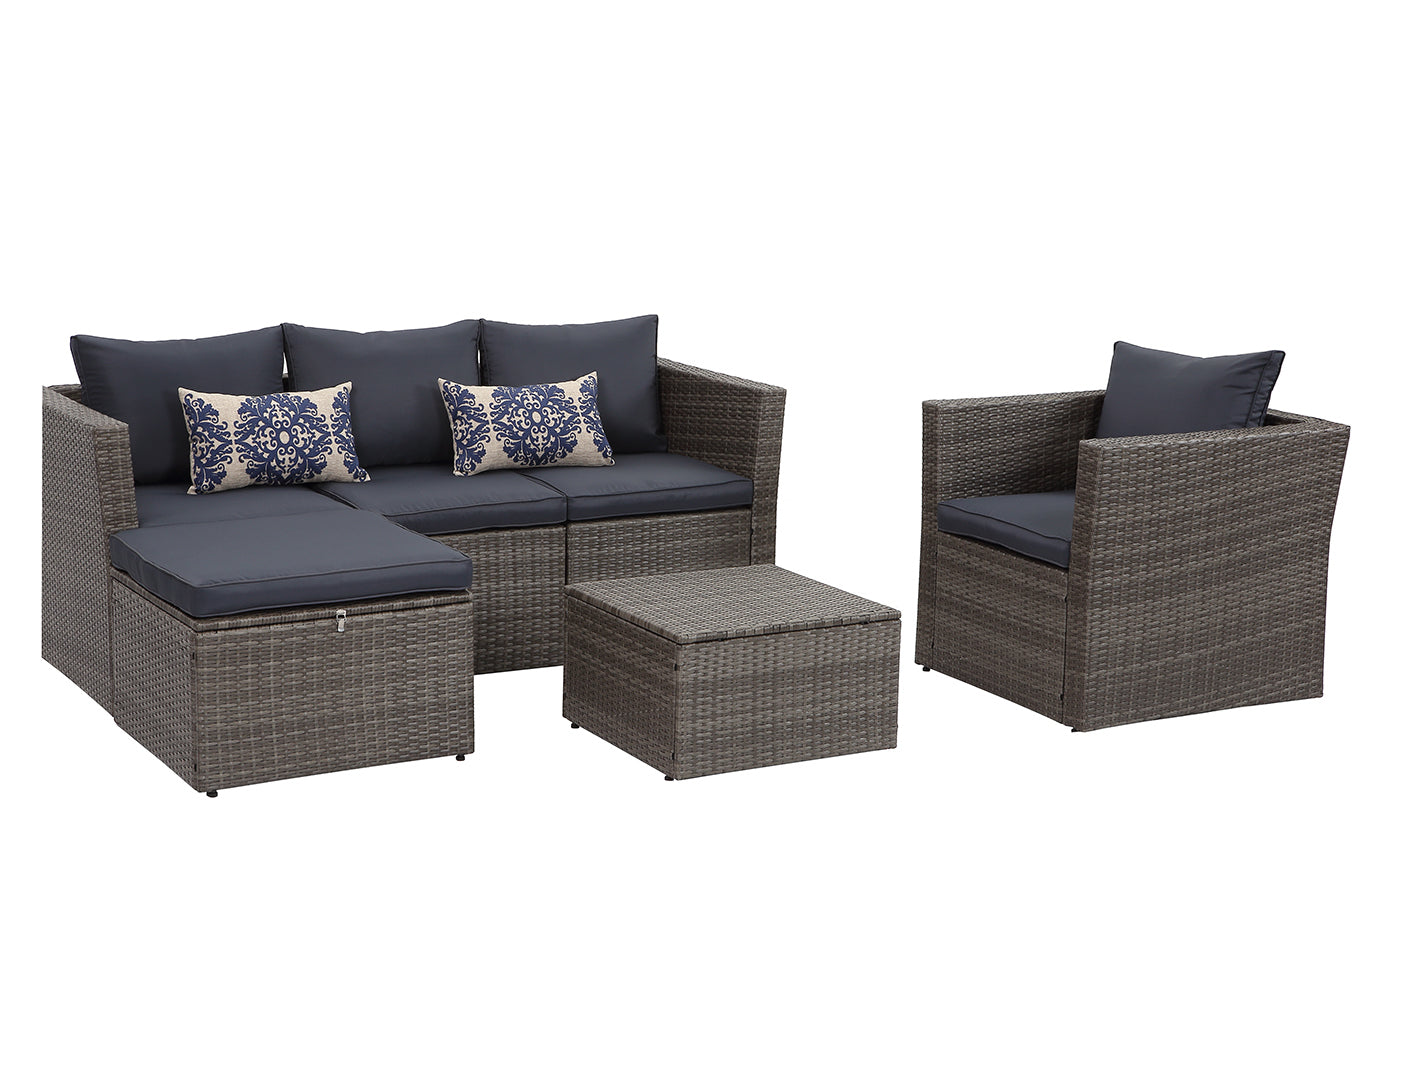 Brisk 6 Piece All Weather Wicker Sofa Seating Group with Cushions, Ottoman With Storage and Coffee Table